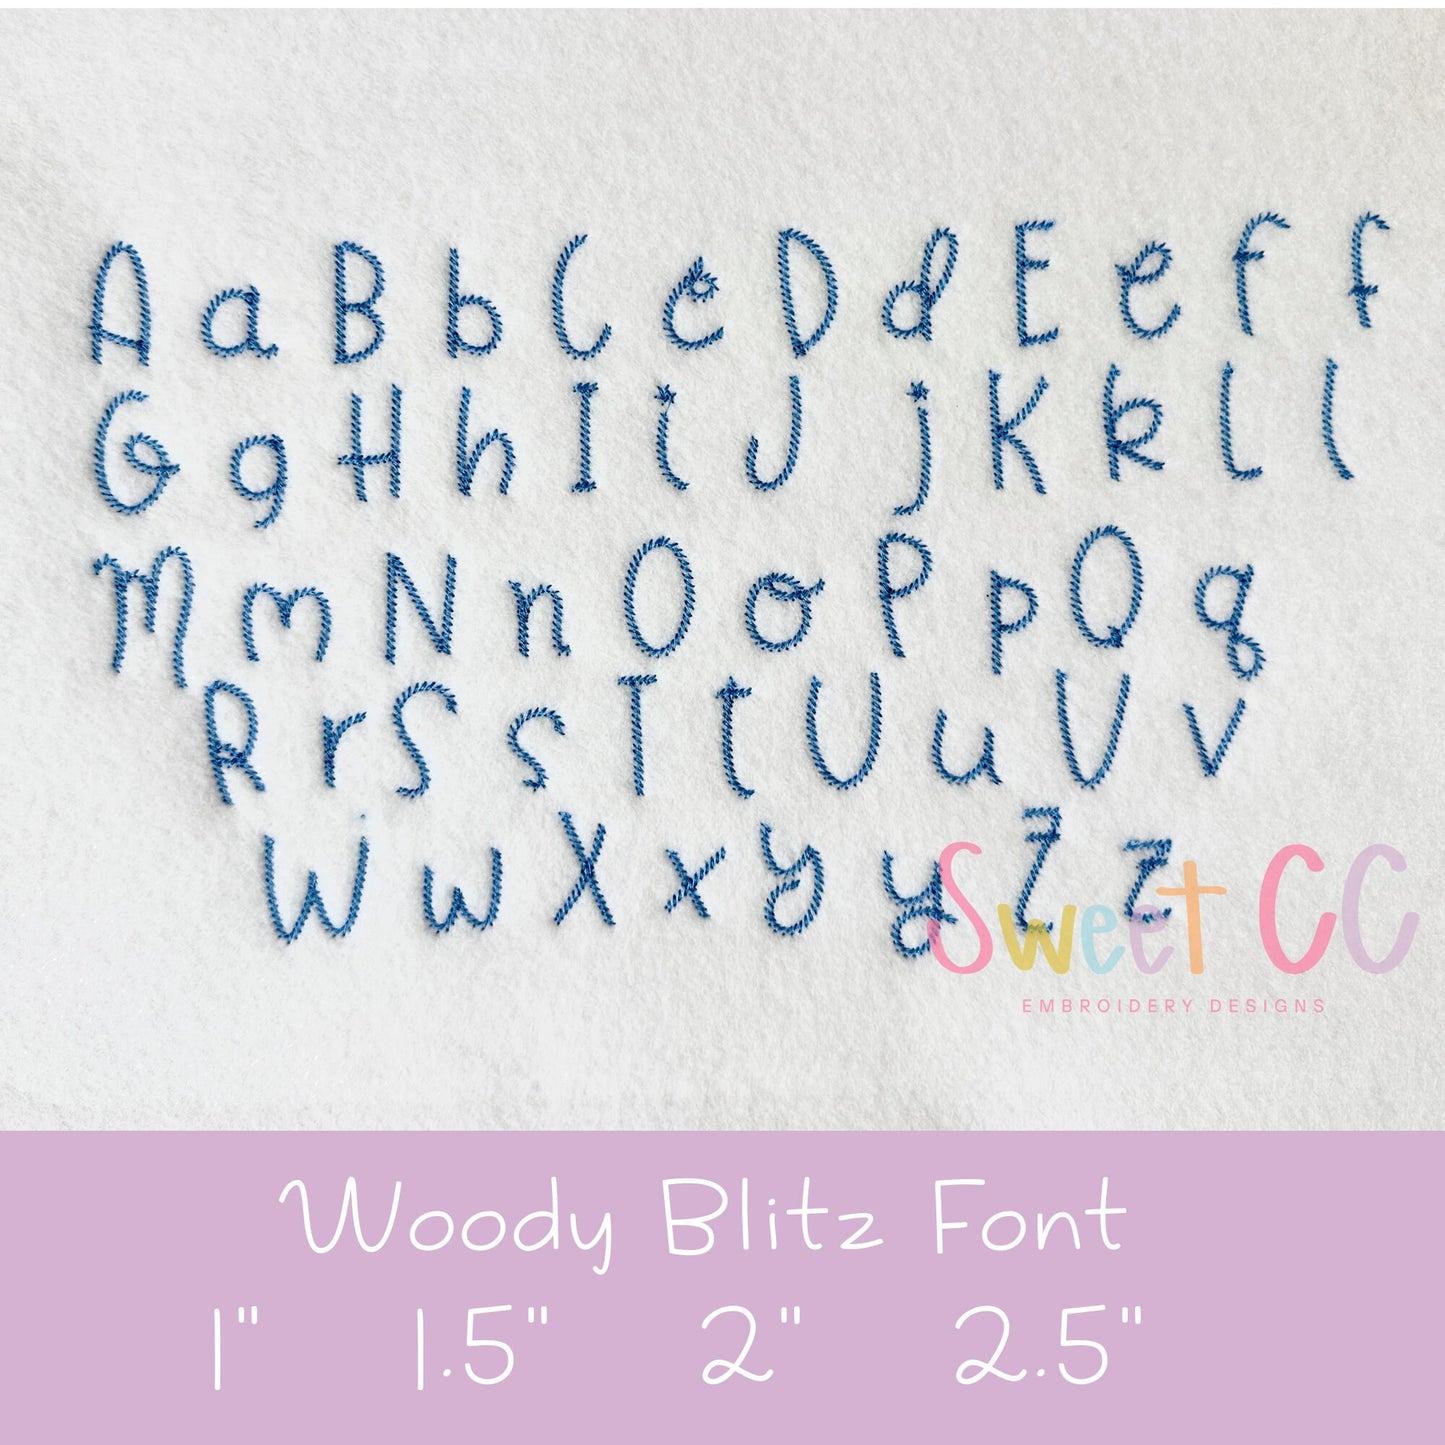 Woody Blitz Stitch Font with BX Machine Embroidery 1inch 1.5inch 2 inch 2.5inch